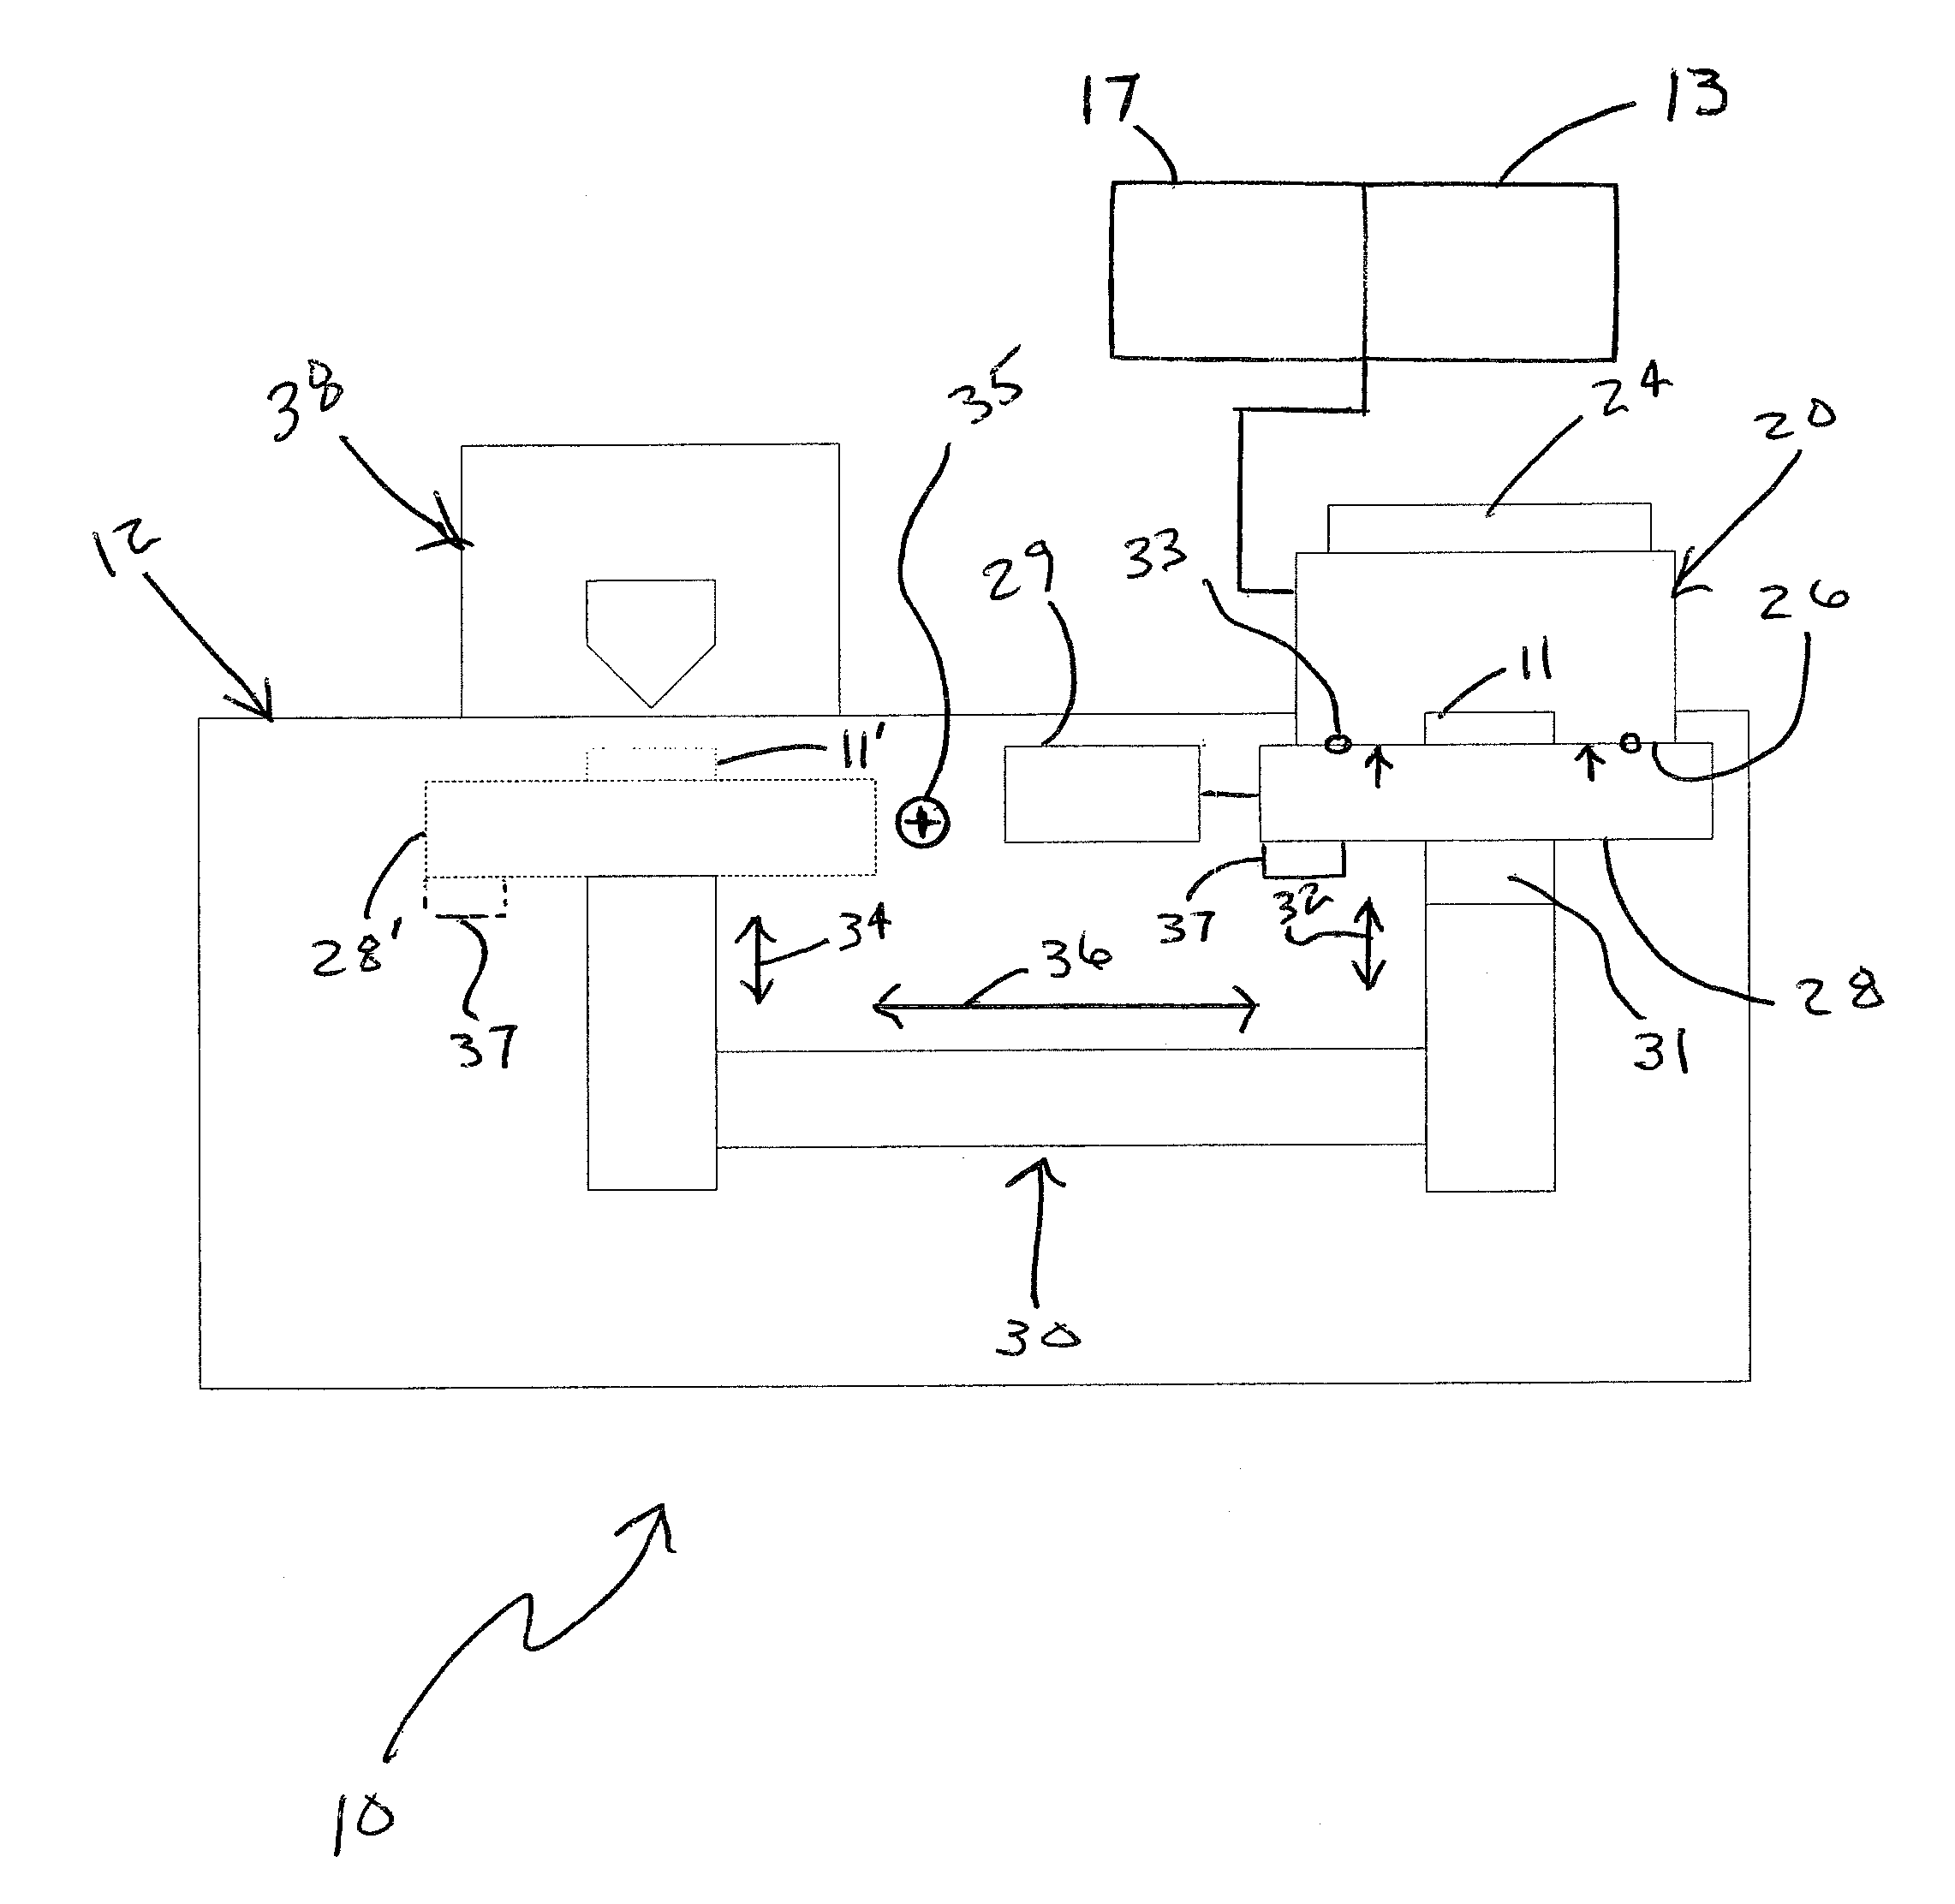 Sample introduction and transfer system and method